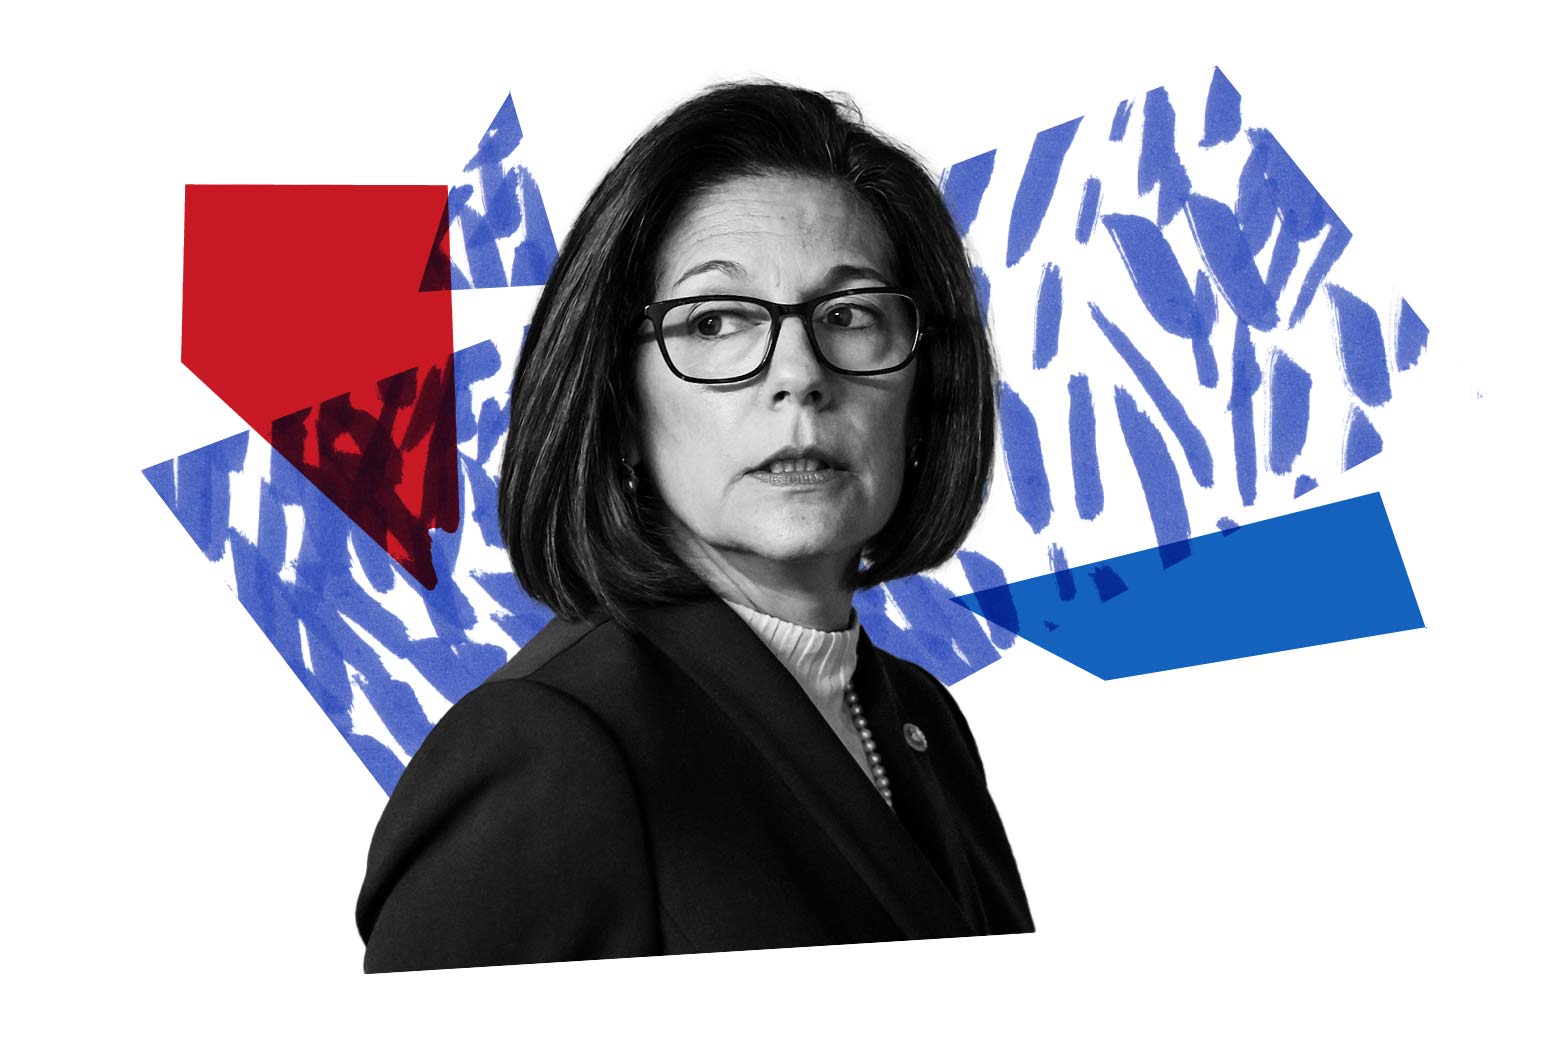 Catherine Cortez Masto in front of different-colored shapes, including one shaped like Nevada